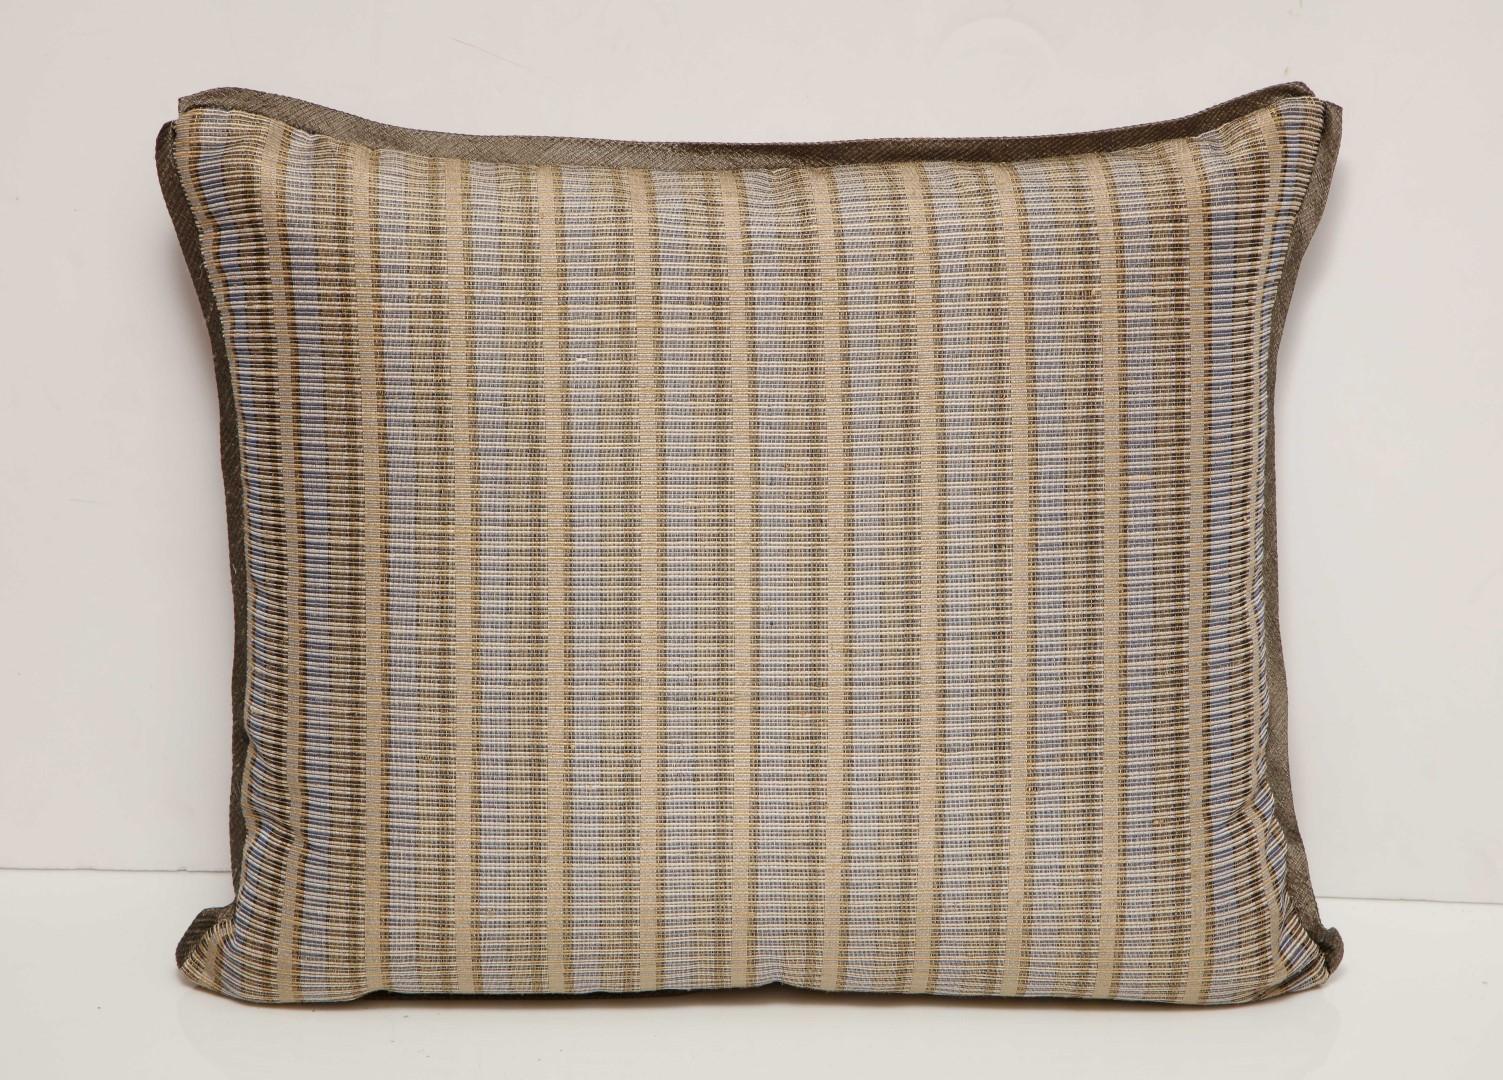 Pair of Fortuny Fabric Cushions in the Peruviano Pattern 1